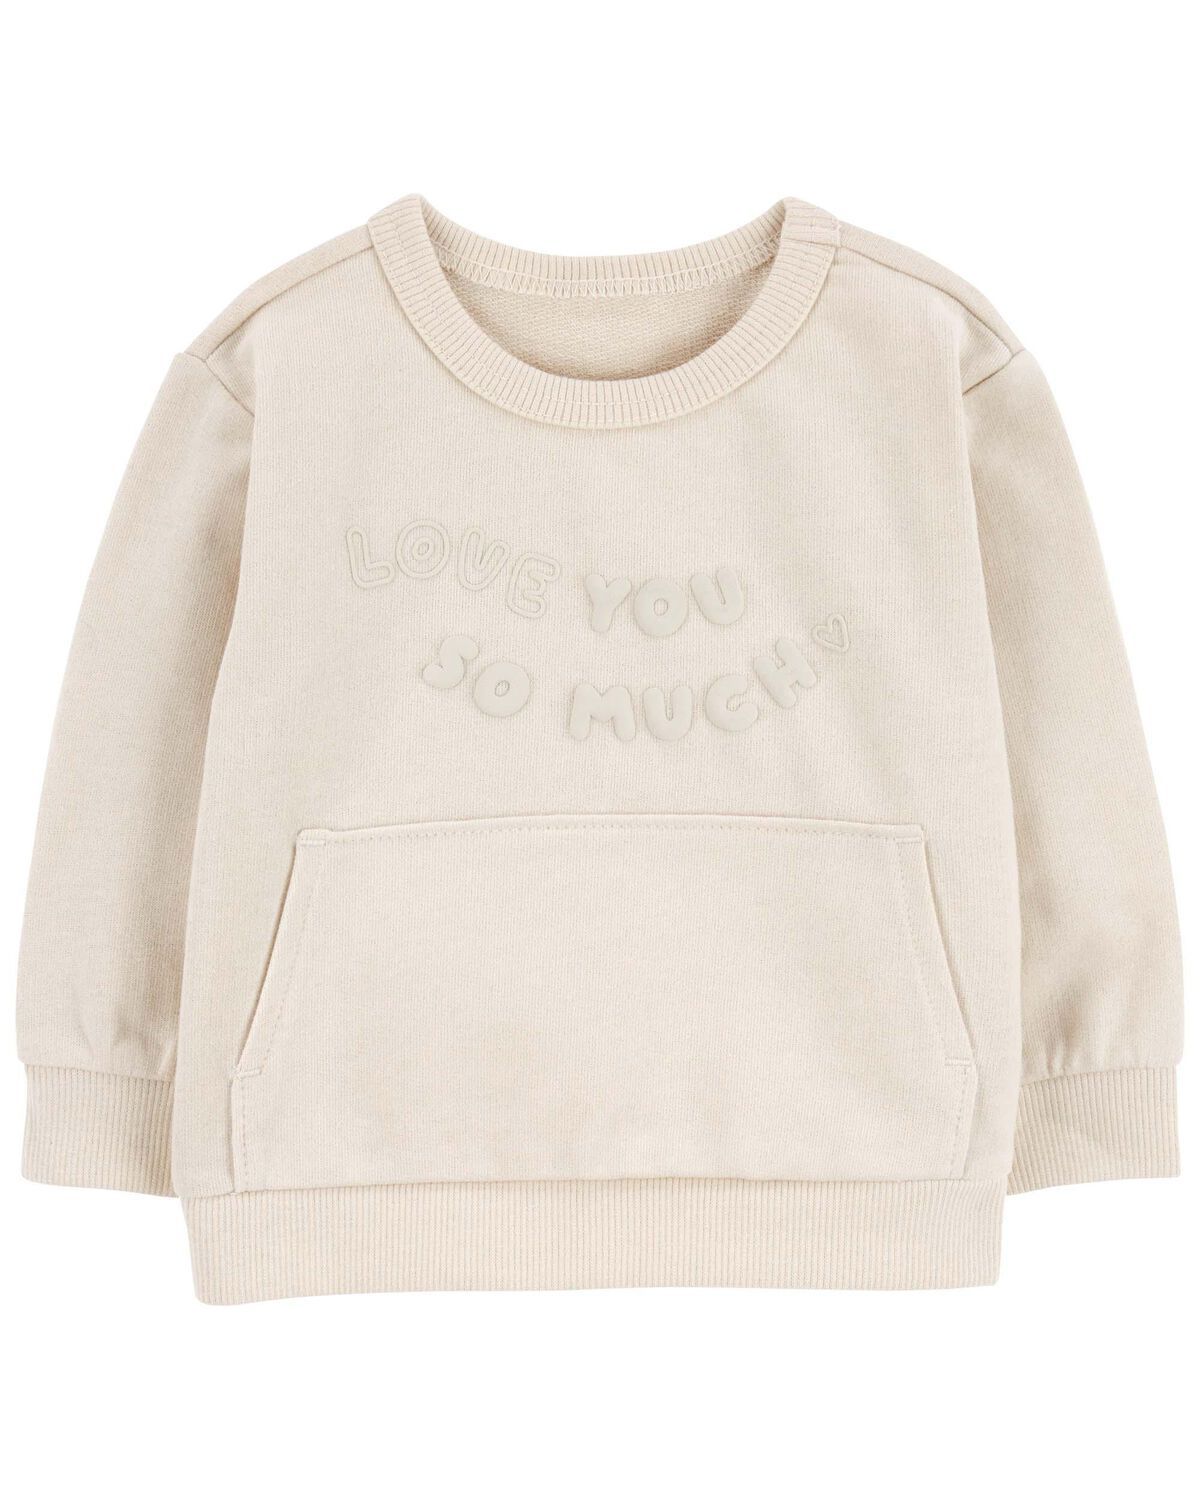 Khaki Baby Love You So Much Pullover | carters.com | Carter's